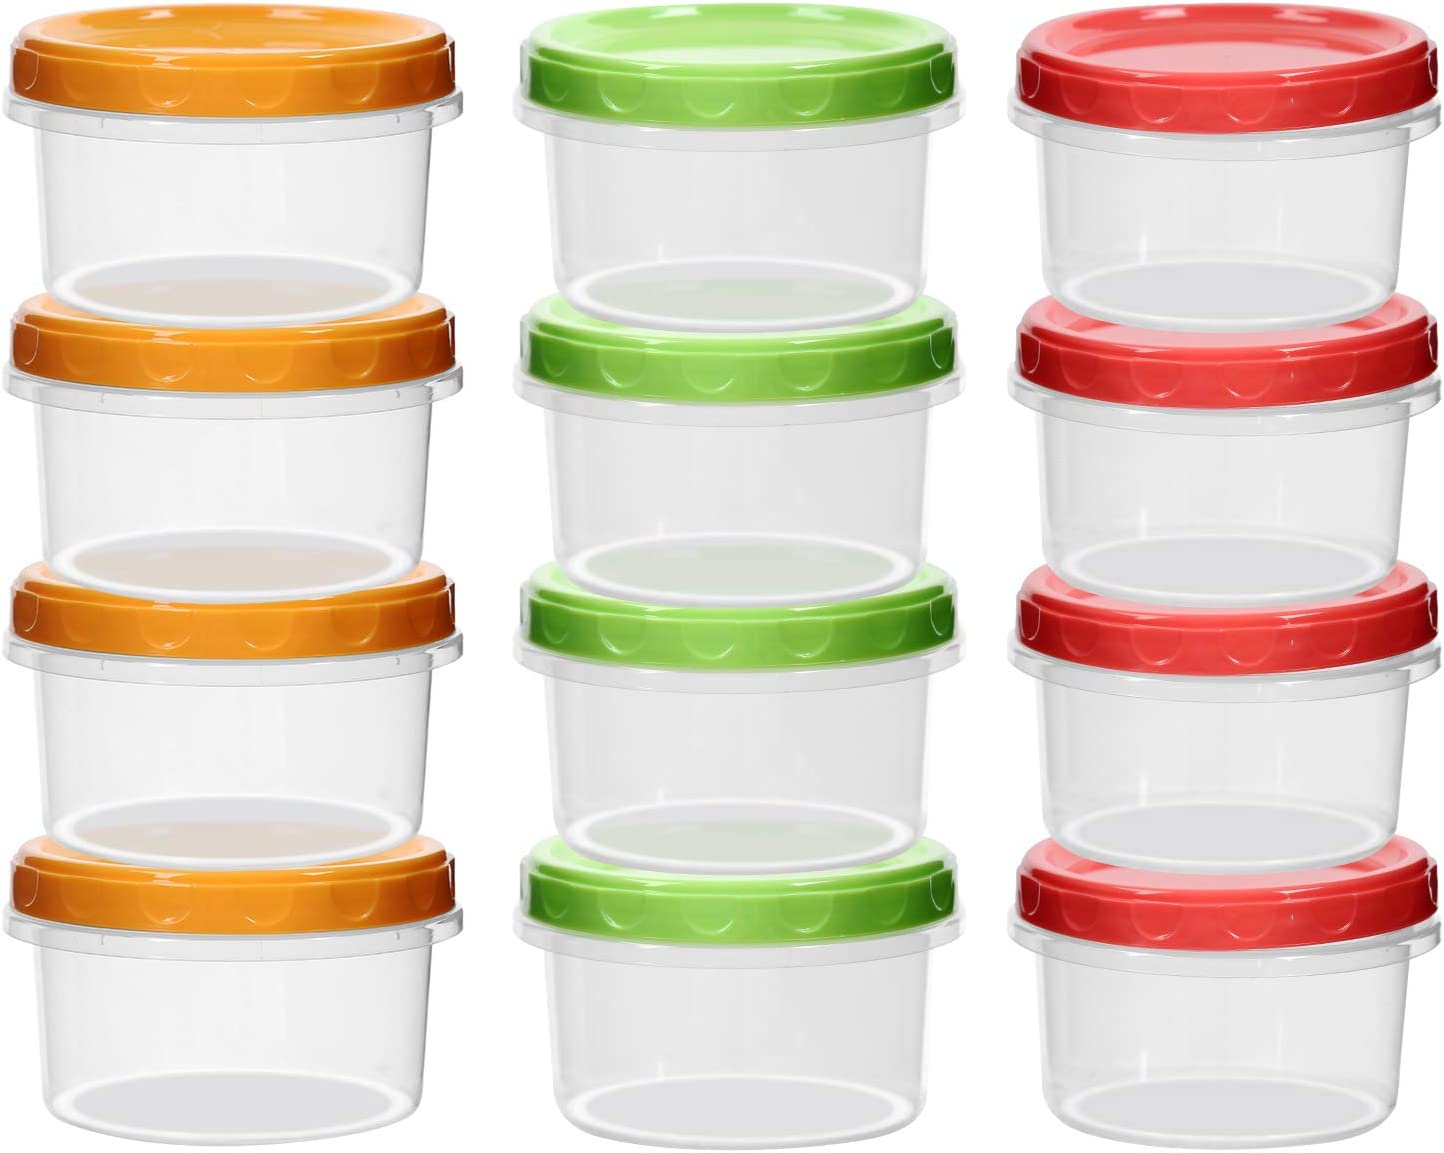 EONJOE Easy Open Baby Food Freezer Containers, 12-Pack